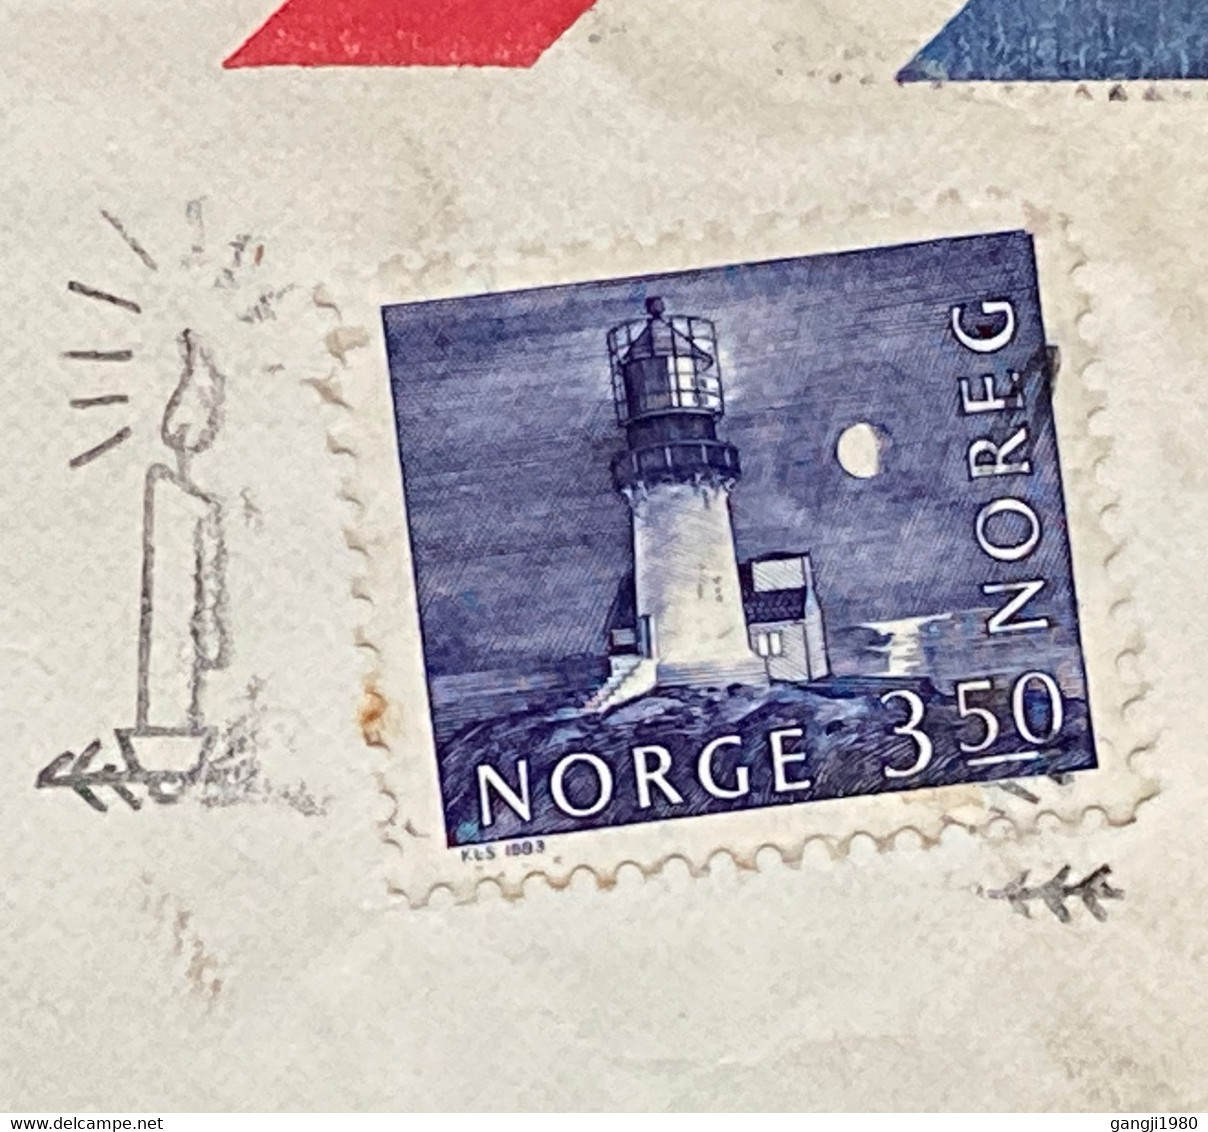 NORWAY,1984, AIR MAIL COVER TO INDIA, BERGEN CITY, CANDLE PICTURE, ROLLAR WAVY CANCELLATION, LIGHT HOUSE STAMP. - Cartas & Documentos